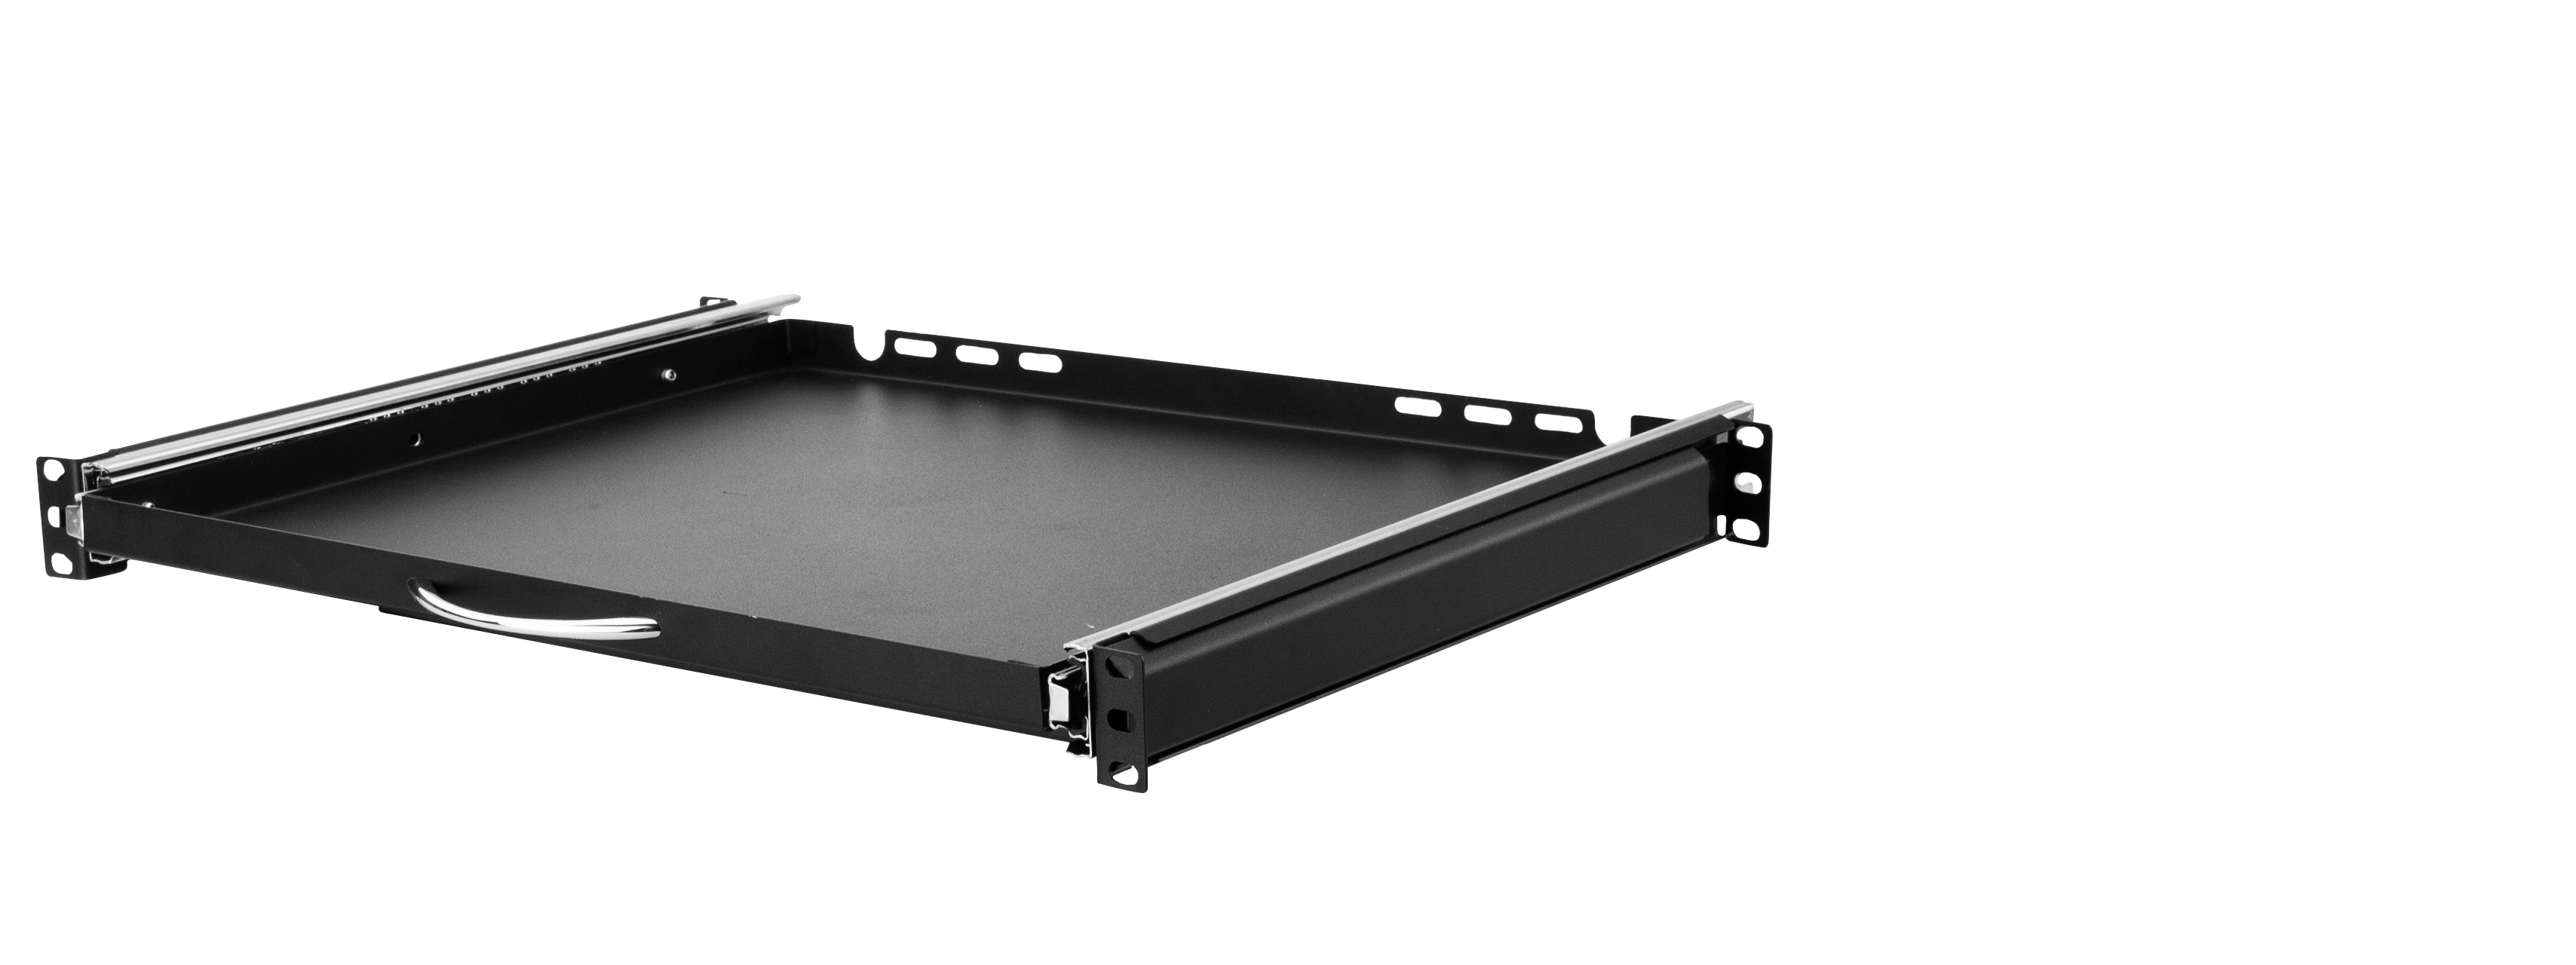 Pull-out shelf 19", 1U 350 mm, for keyboard and mouse, black